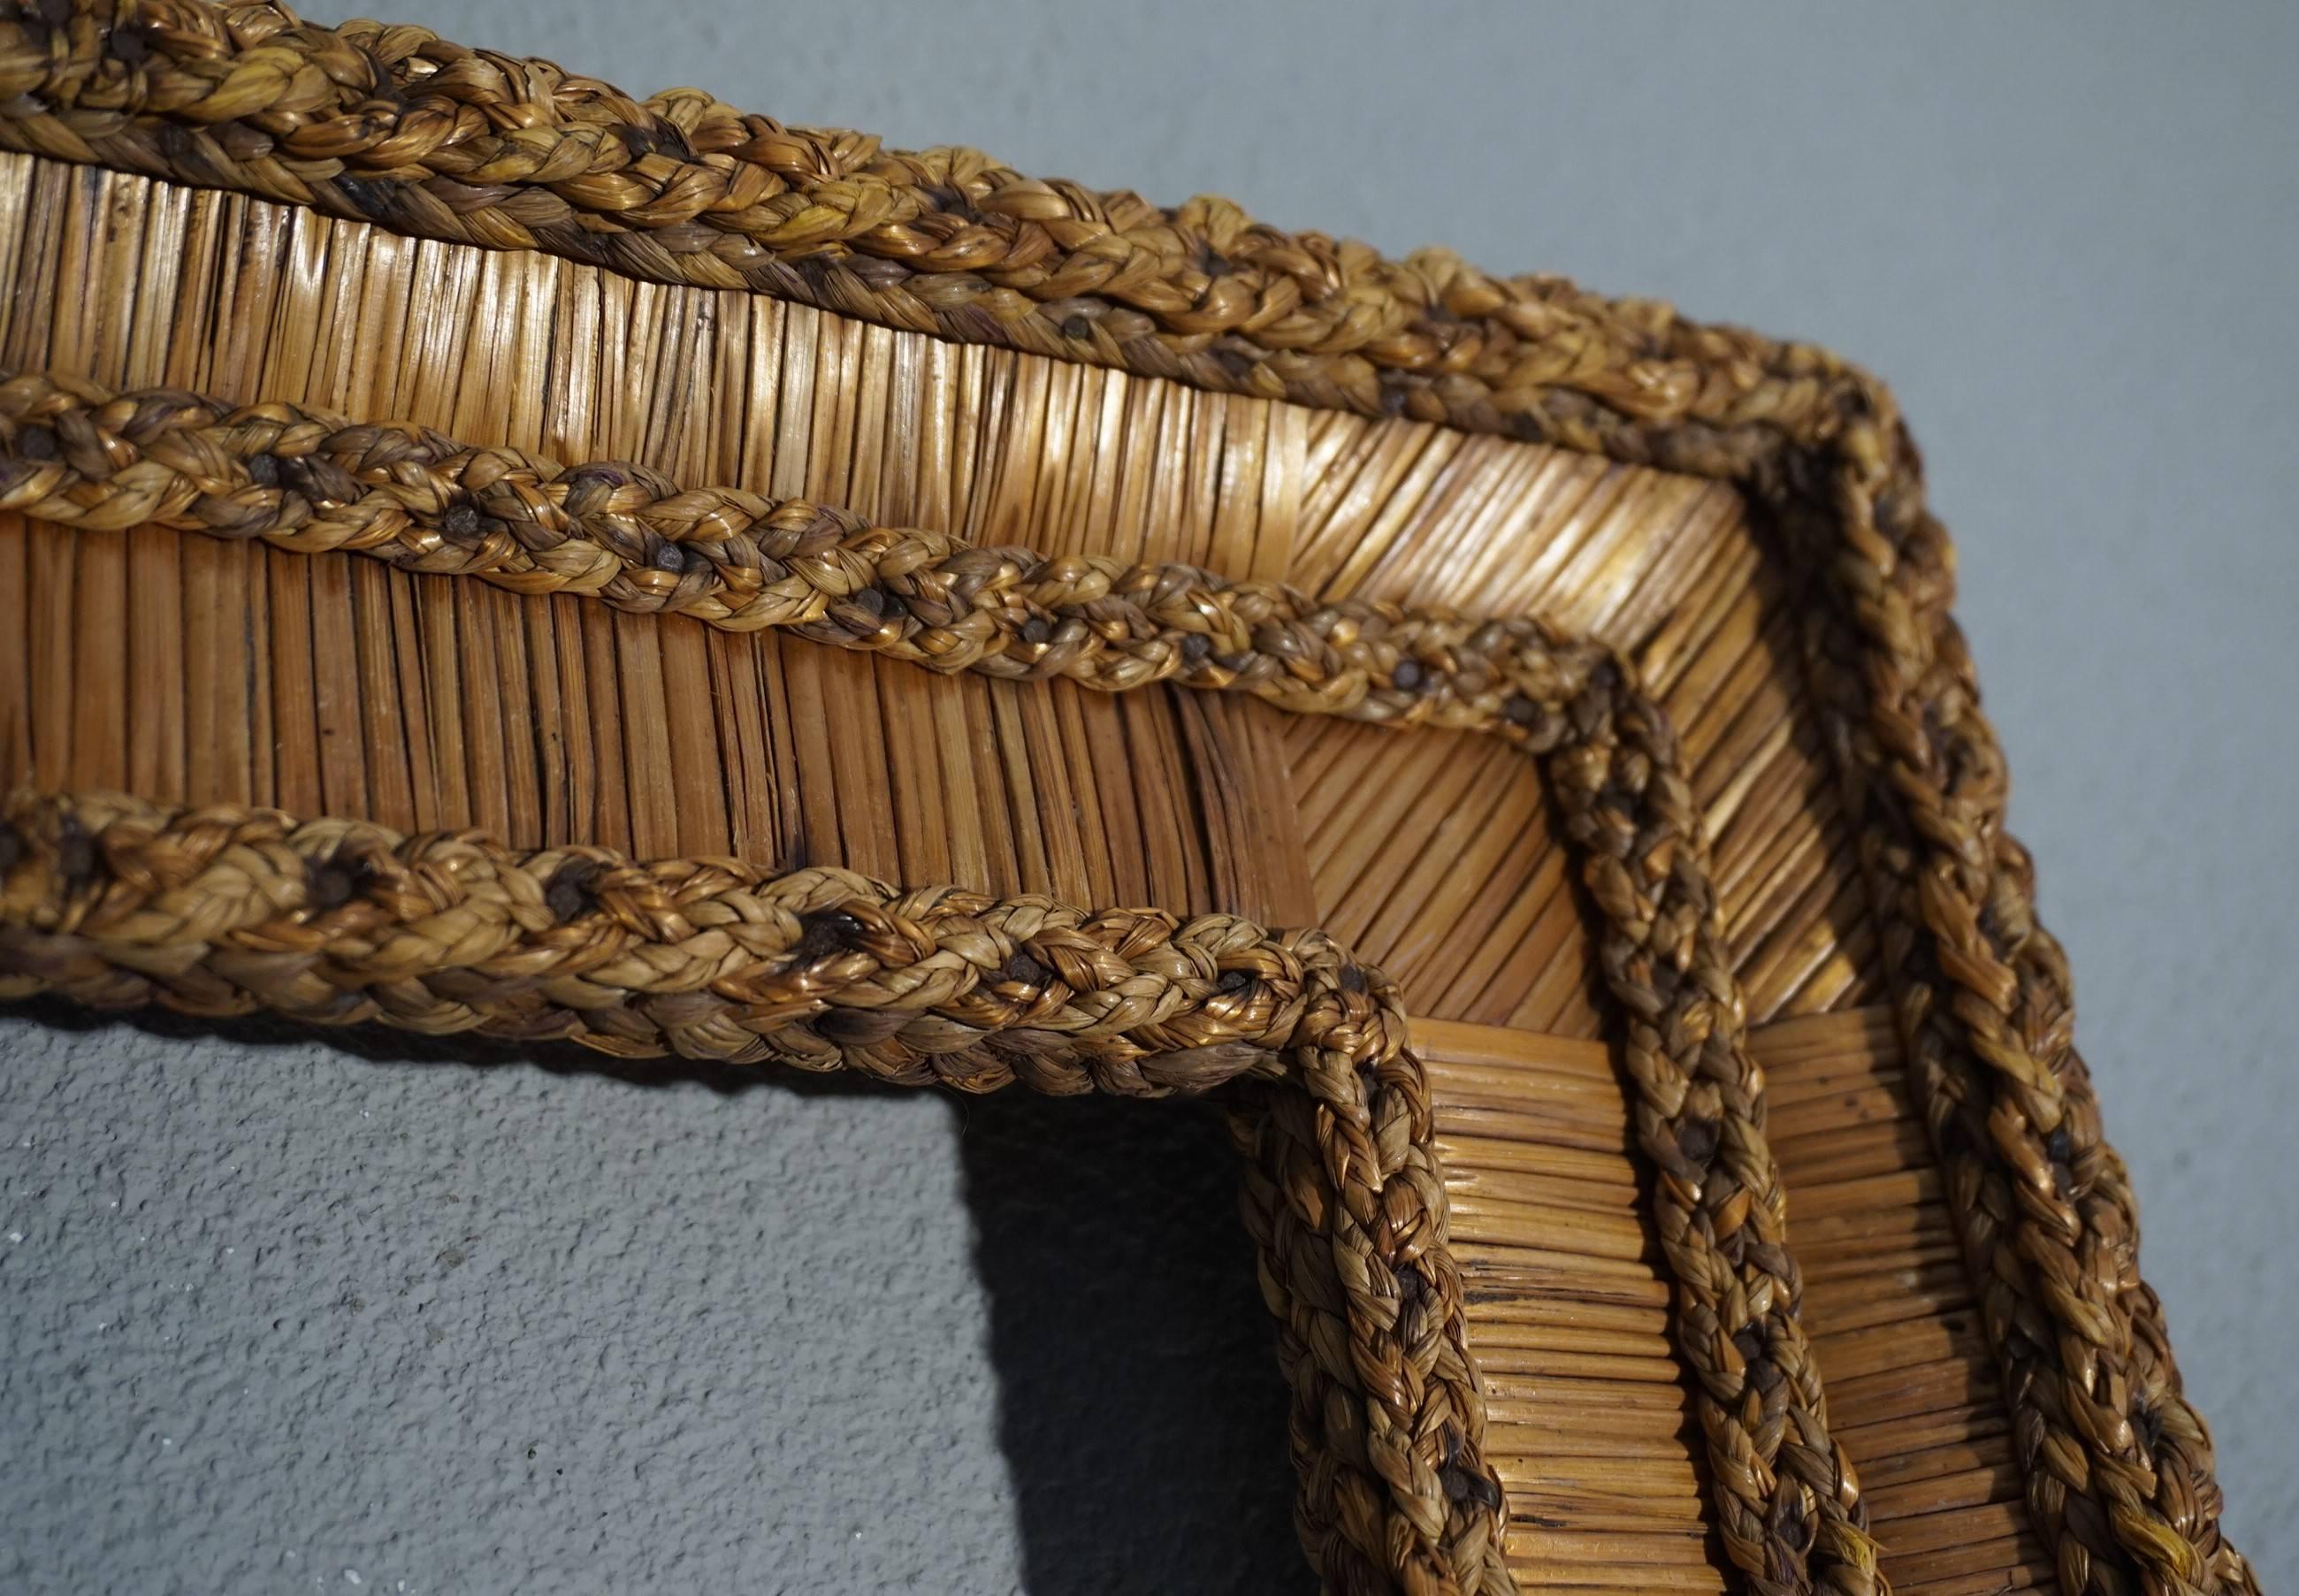 Vintage Hand-Woven Straw on Wood, Stylishly Organic Picture or Mirror Frame  1